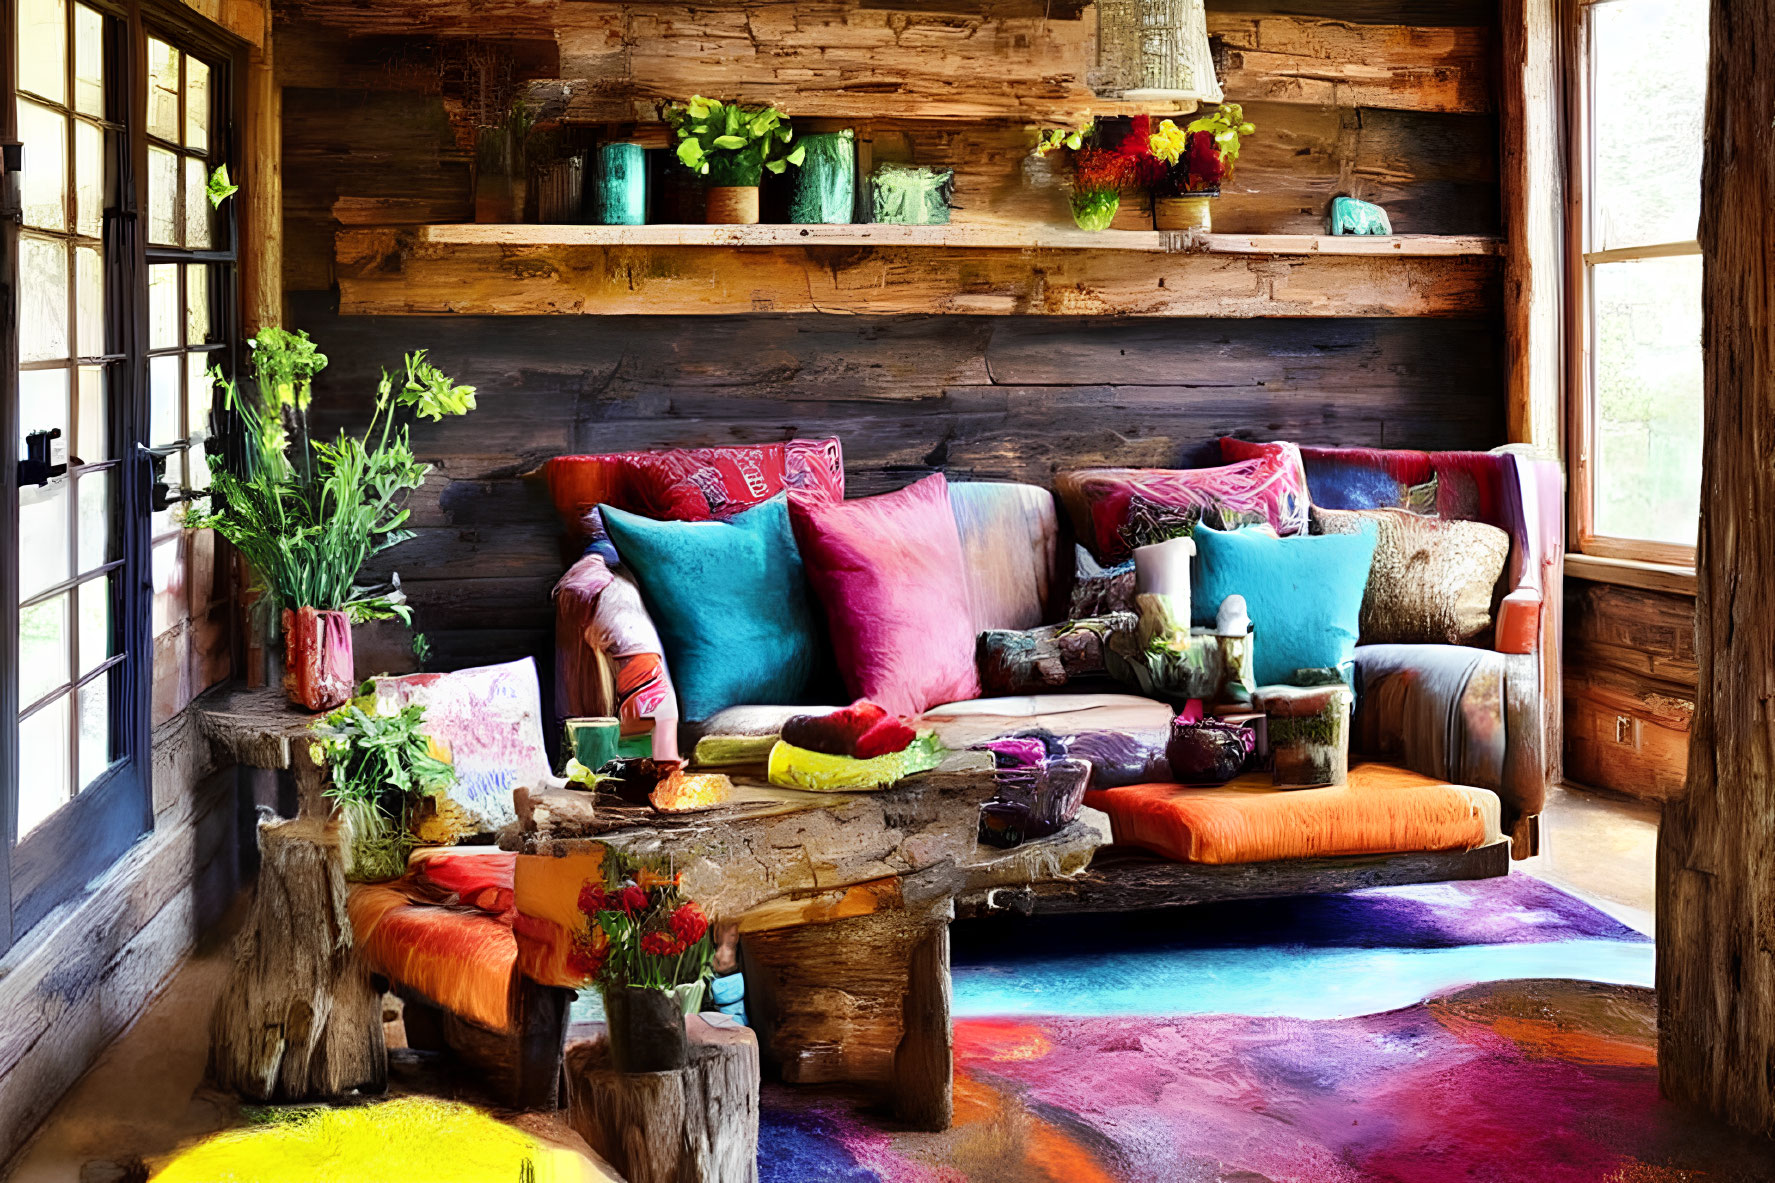 Rustic interior with colorful cushions, wooden bench, rugs, coffee table, and bright flowers